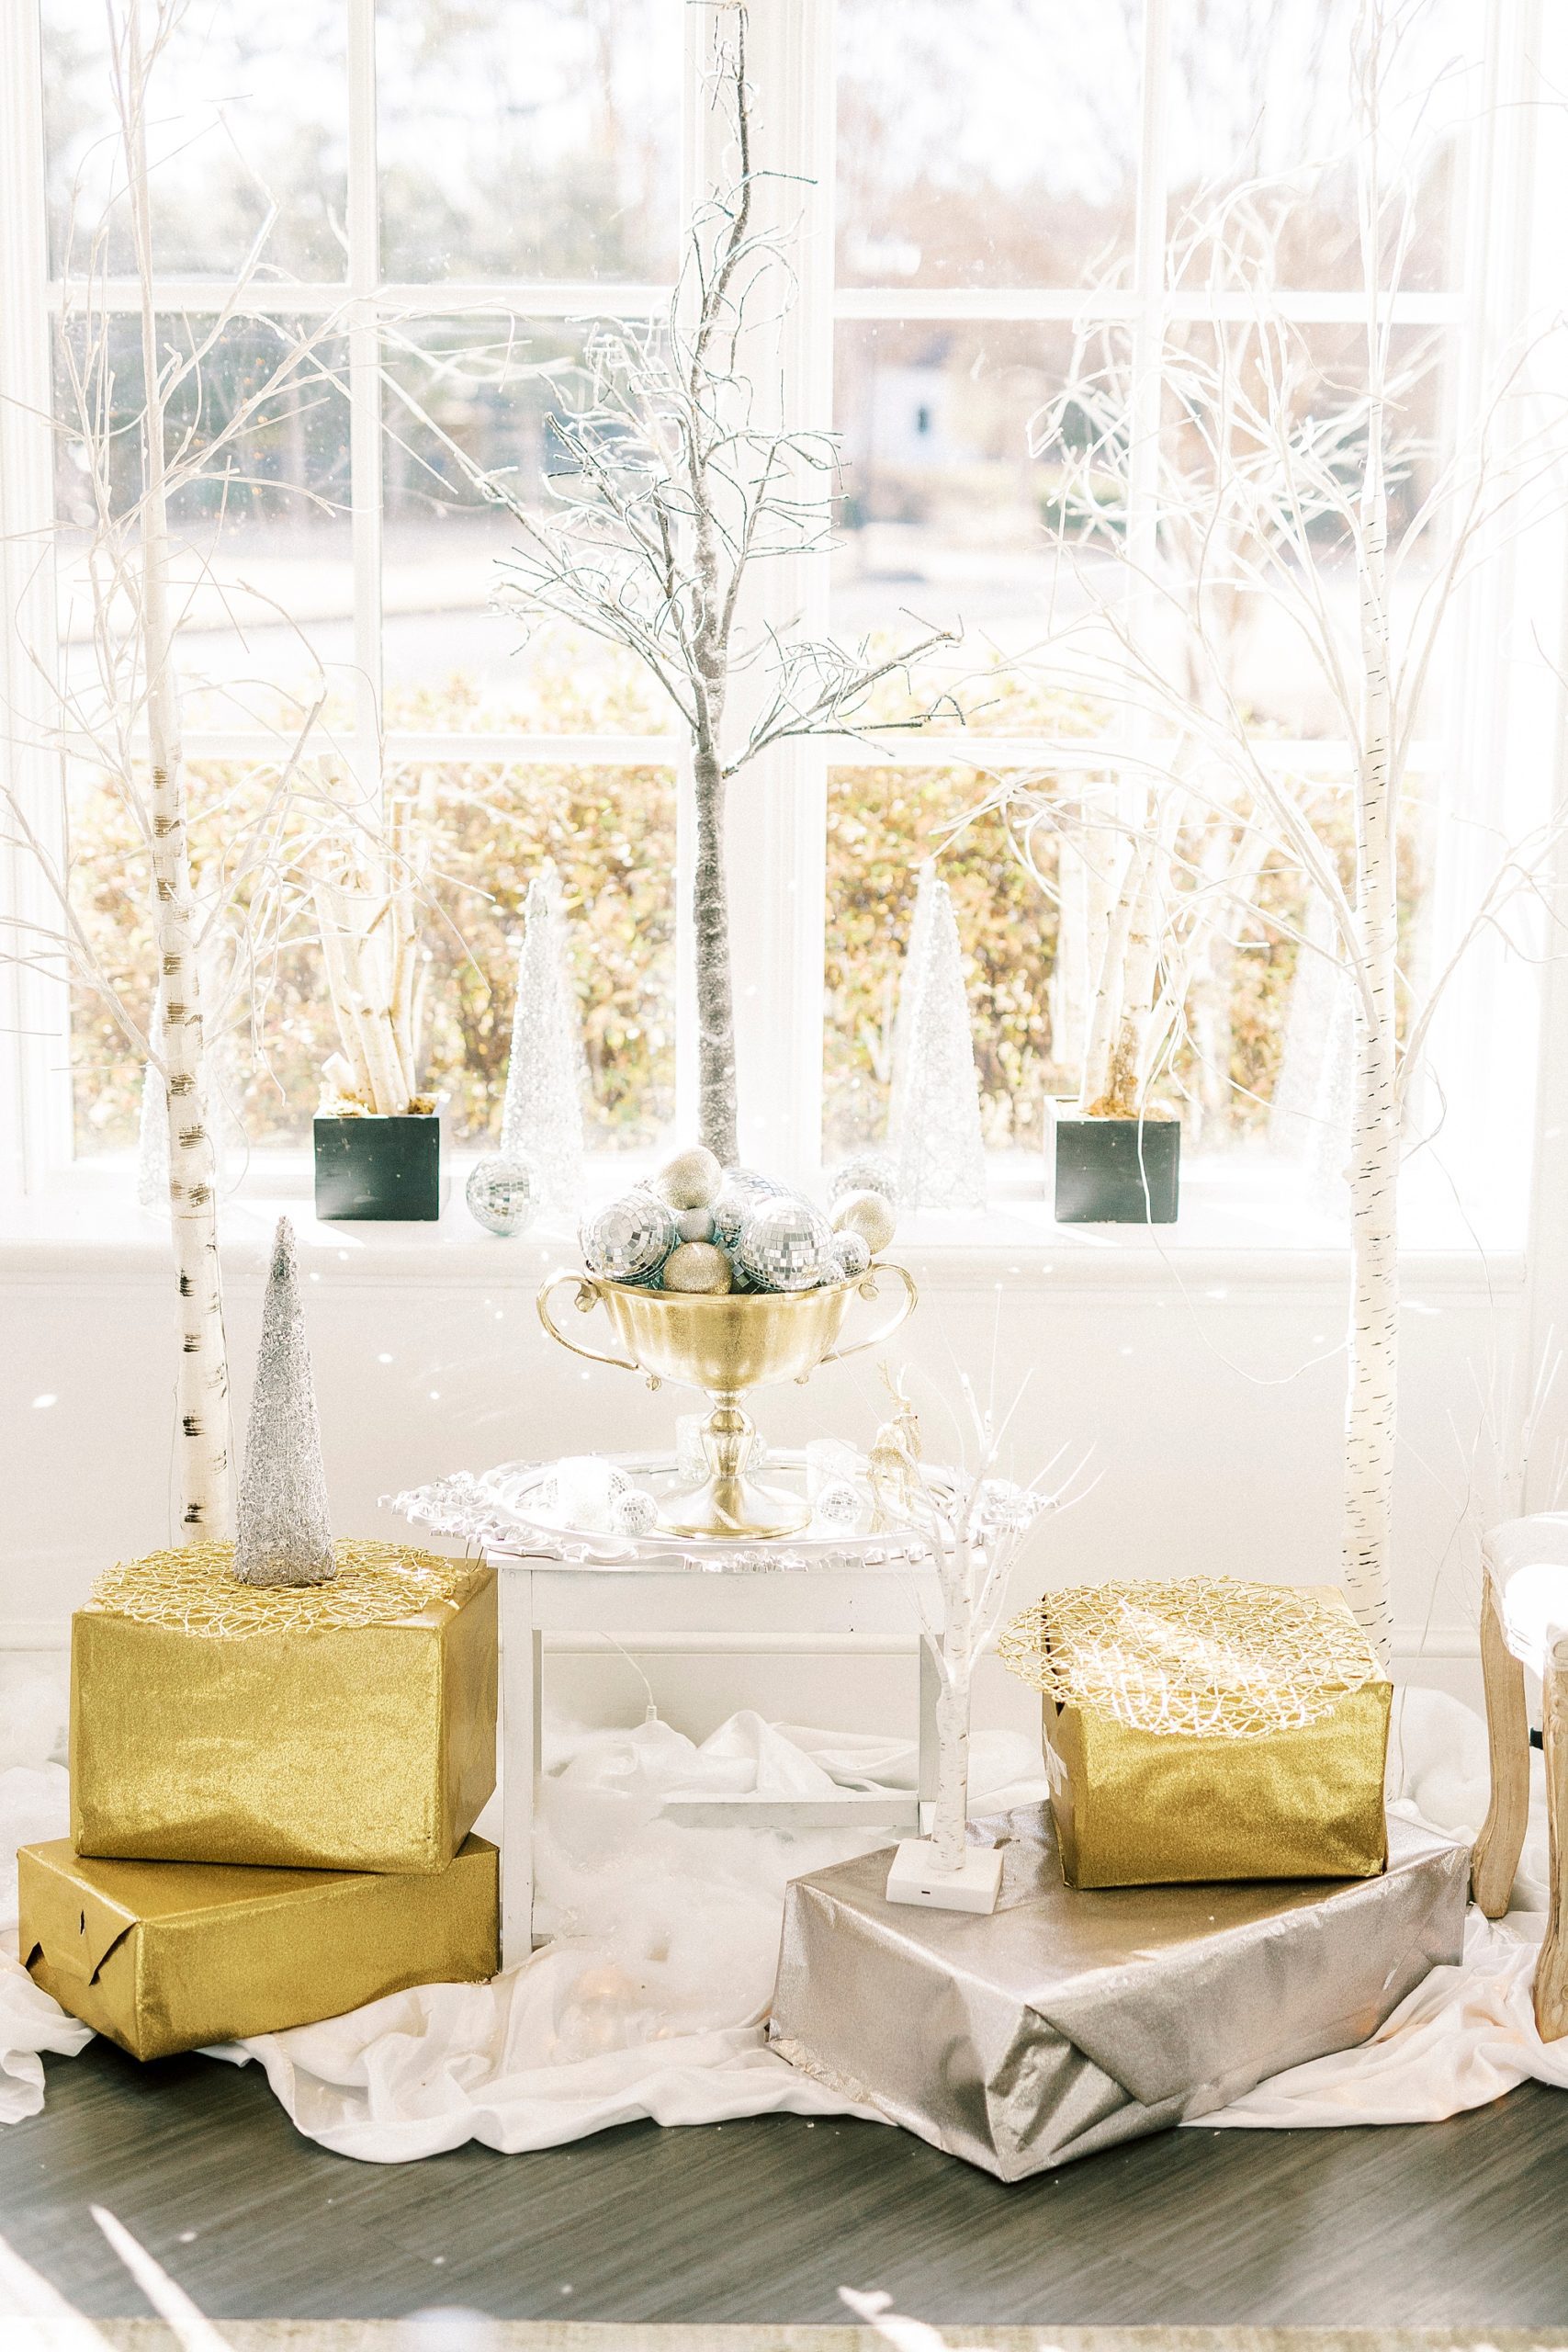 seating area with gold accents for winter wonderland wedding at River Run Country Club